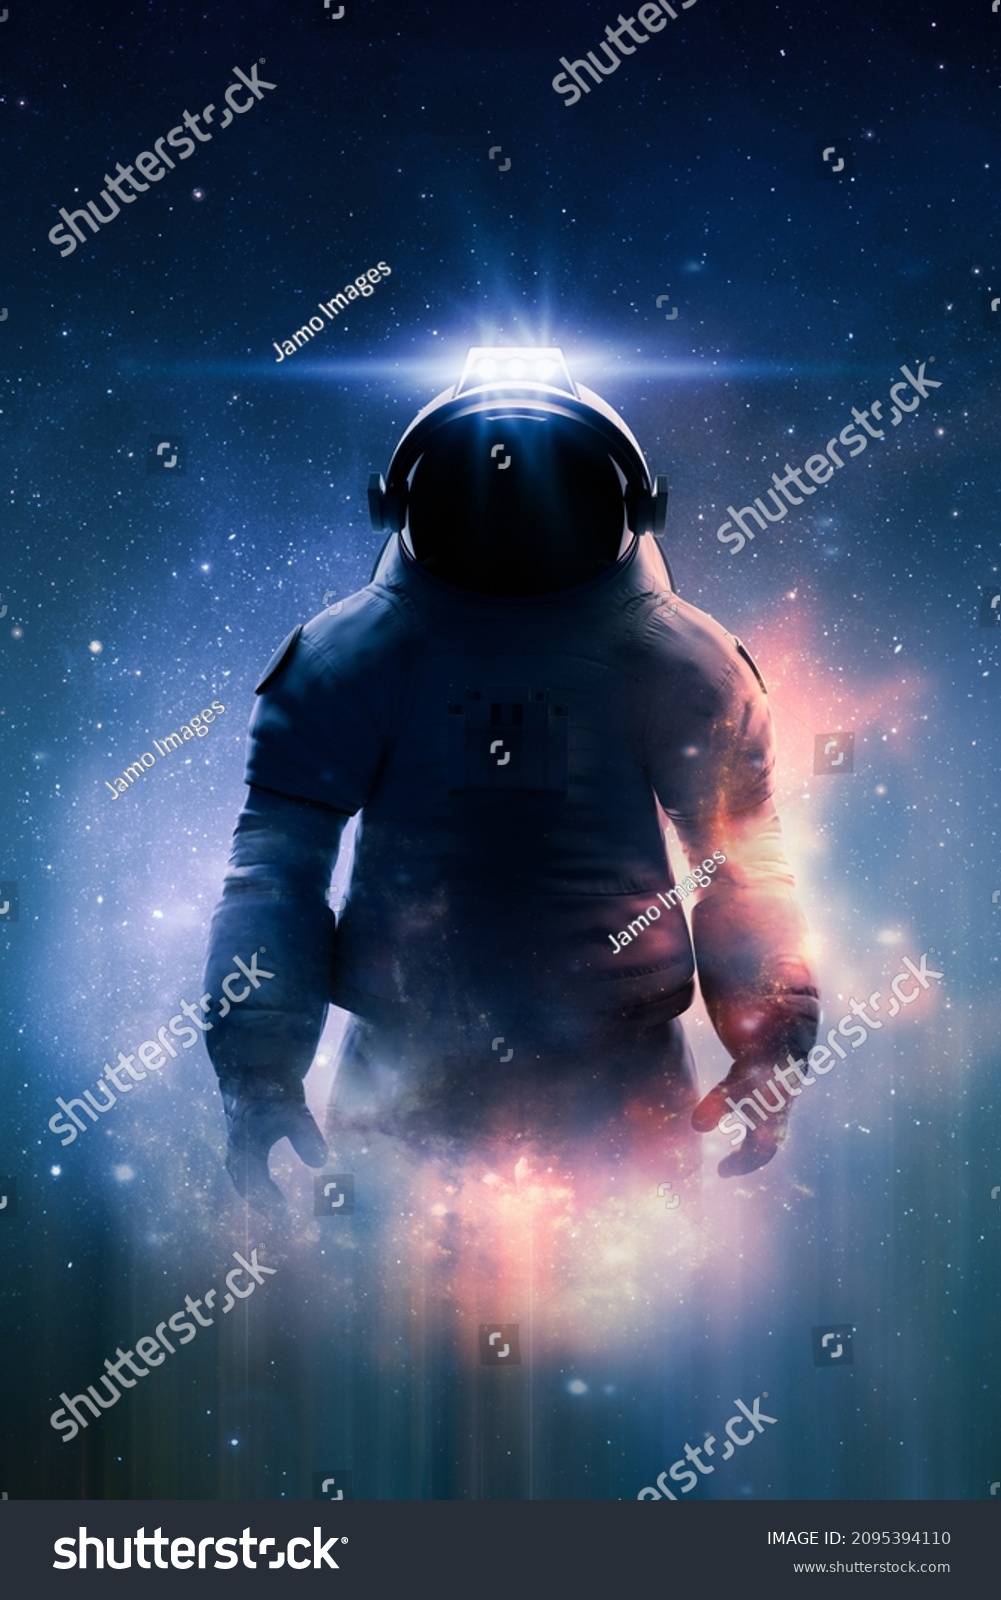 Epic view of an astronaut or cosmonaut in spacesuit in space with stars, nebula and galaxy around him. Sci-fi and fantasy theme. Stars in the image furnished by NASA. 3D rendering. #2095394110